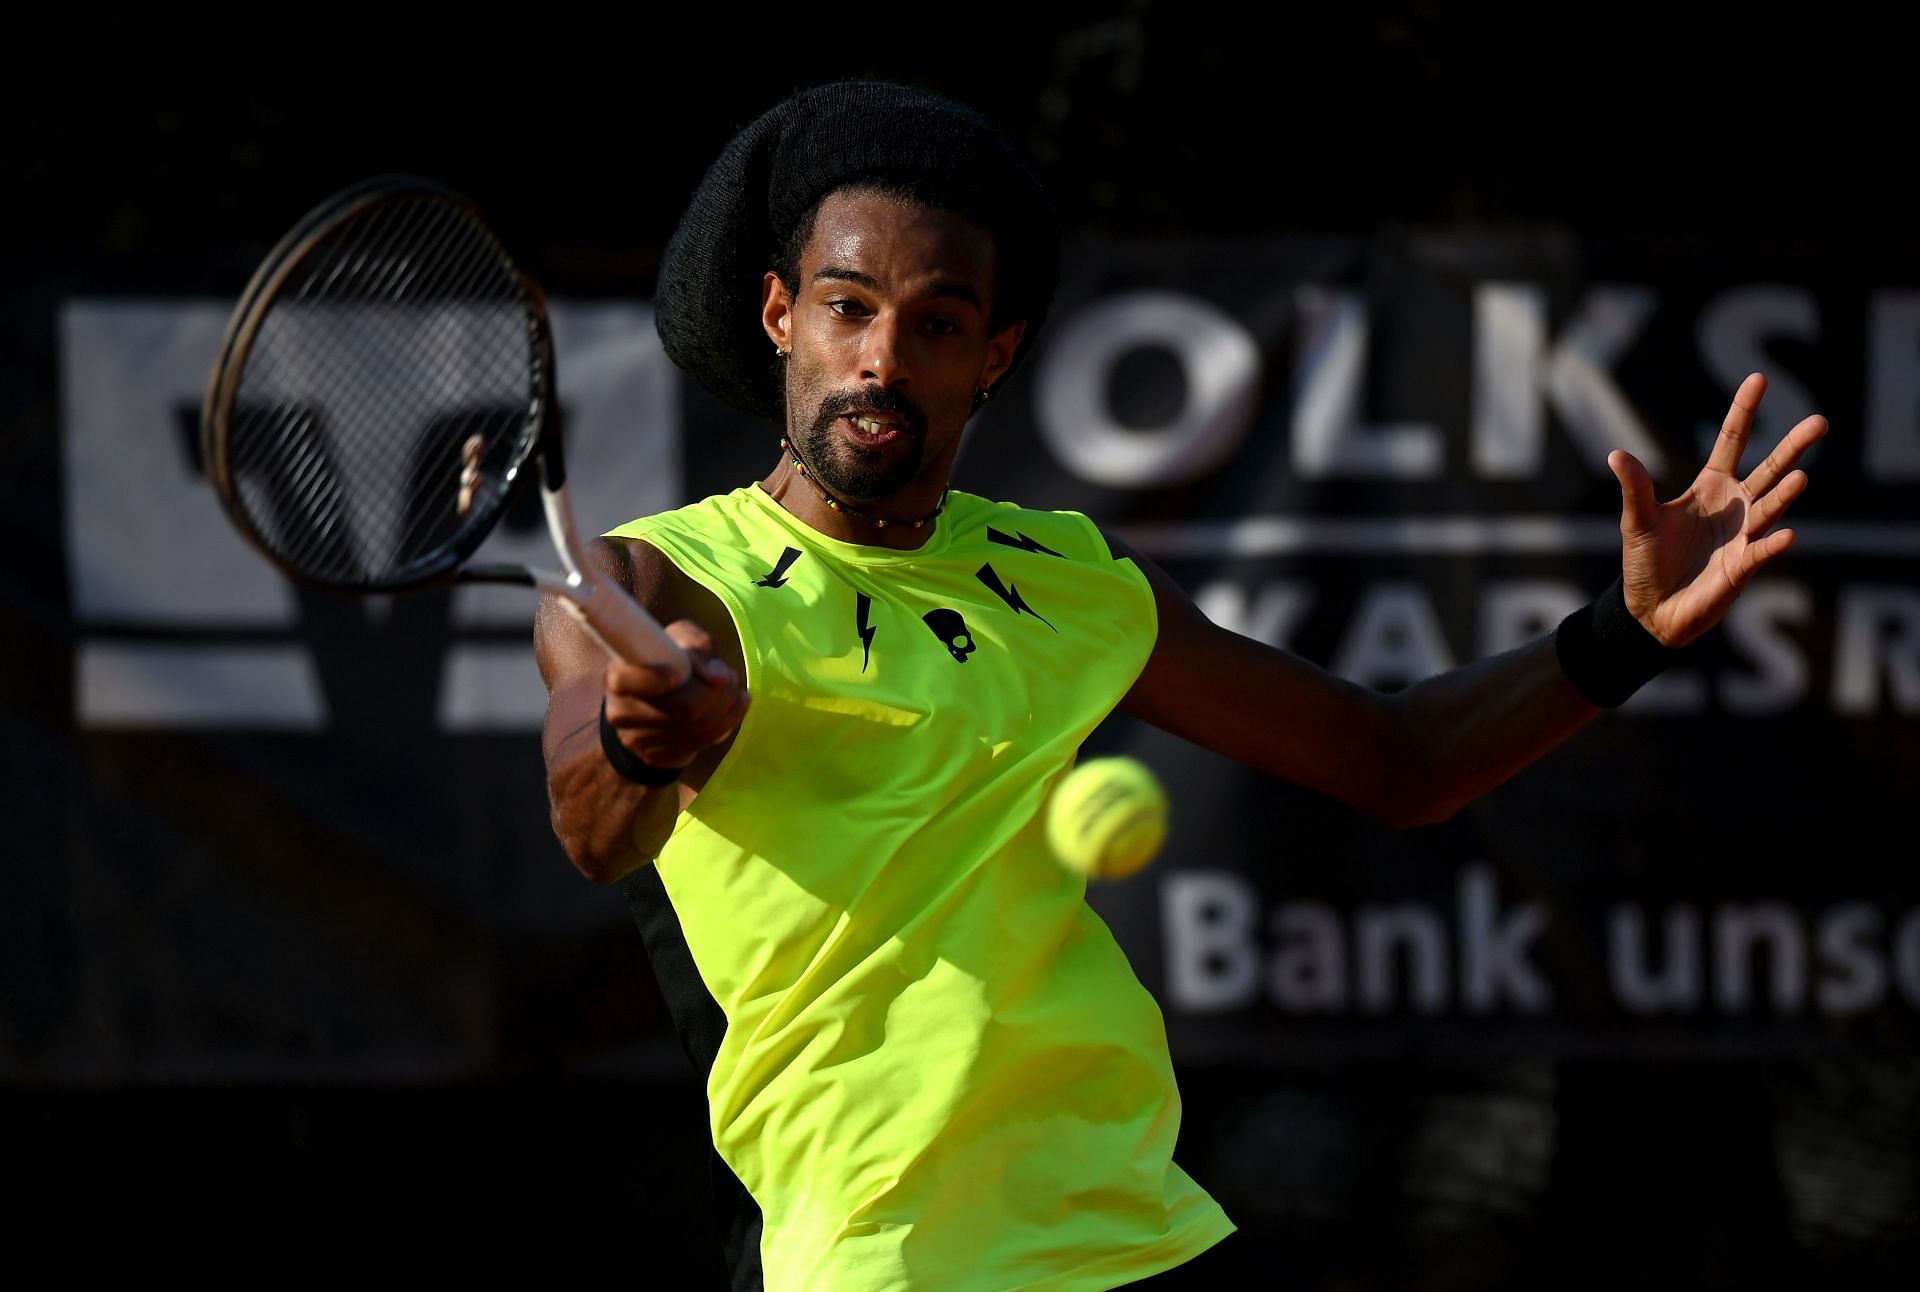 Dustin Brown and wife receive online abuse, call out ATP for inaction